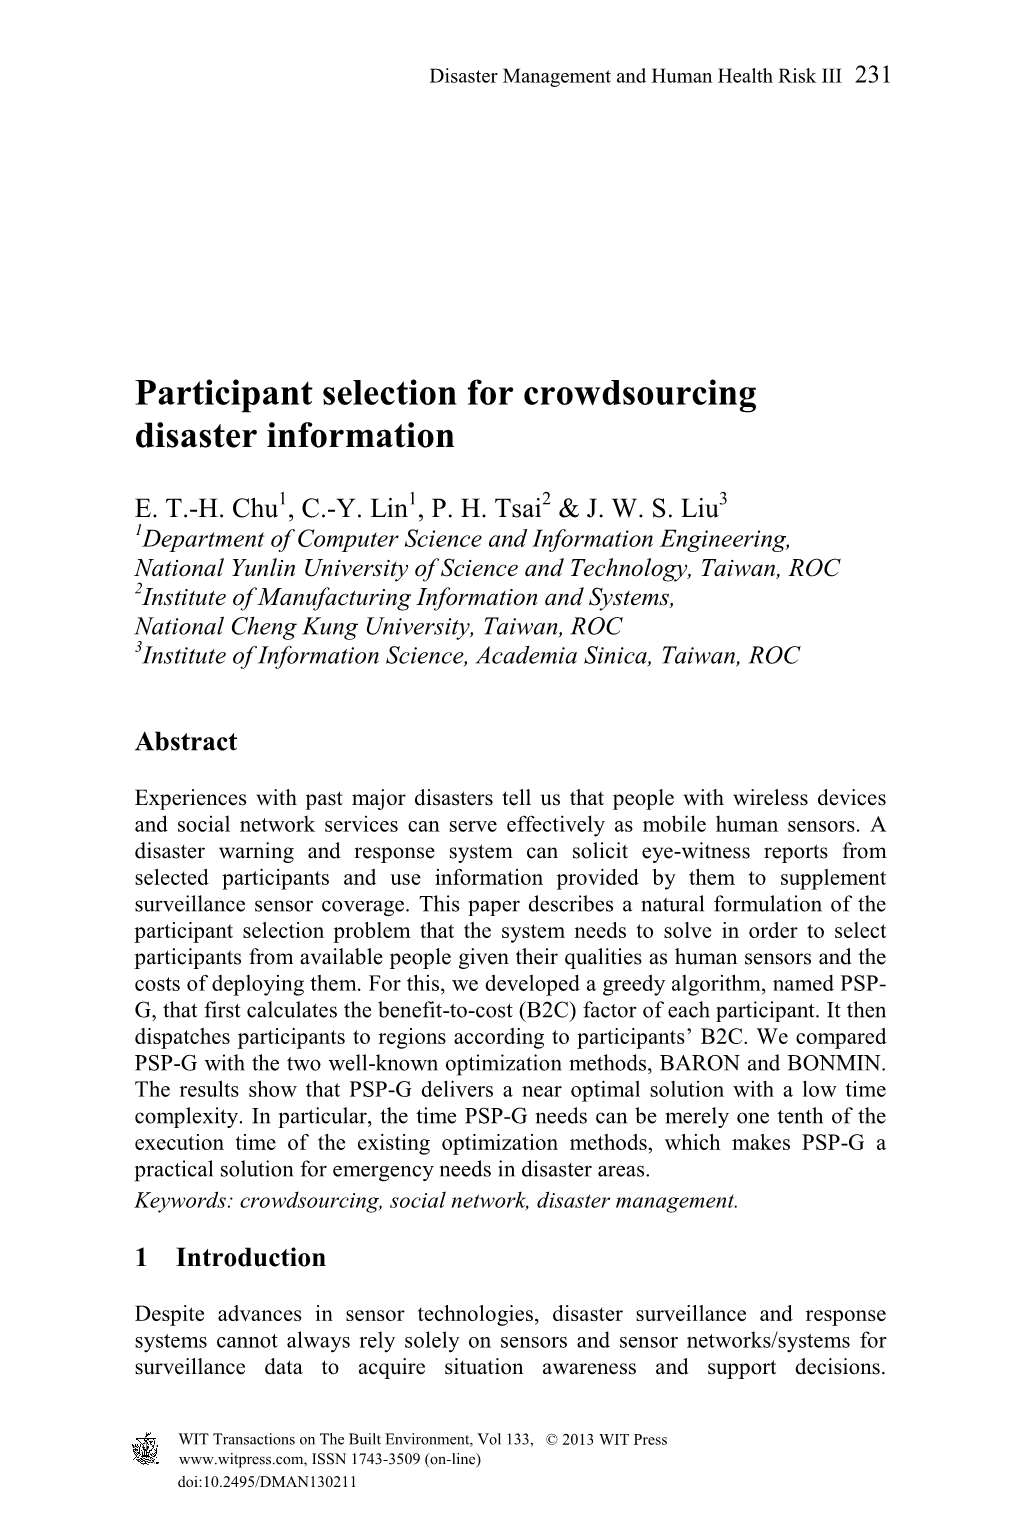 Participant Selection for Crowdsourcing Disaster Information